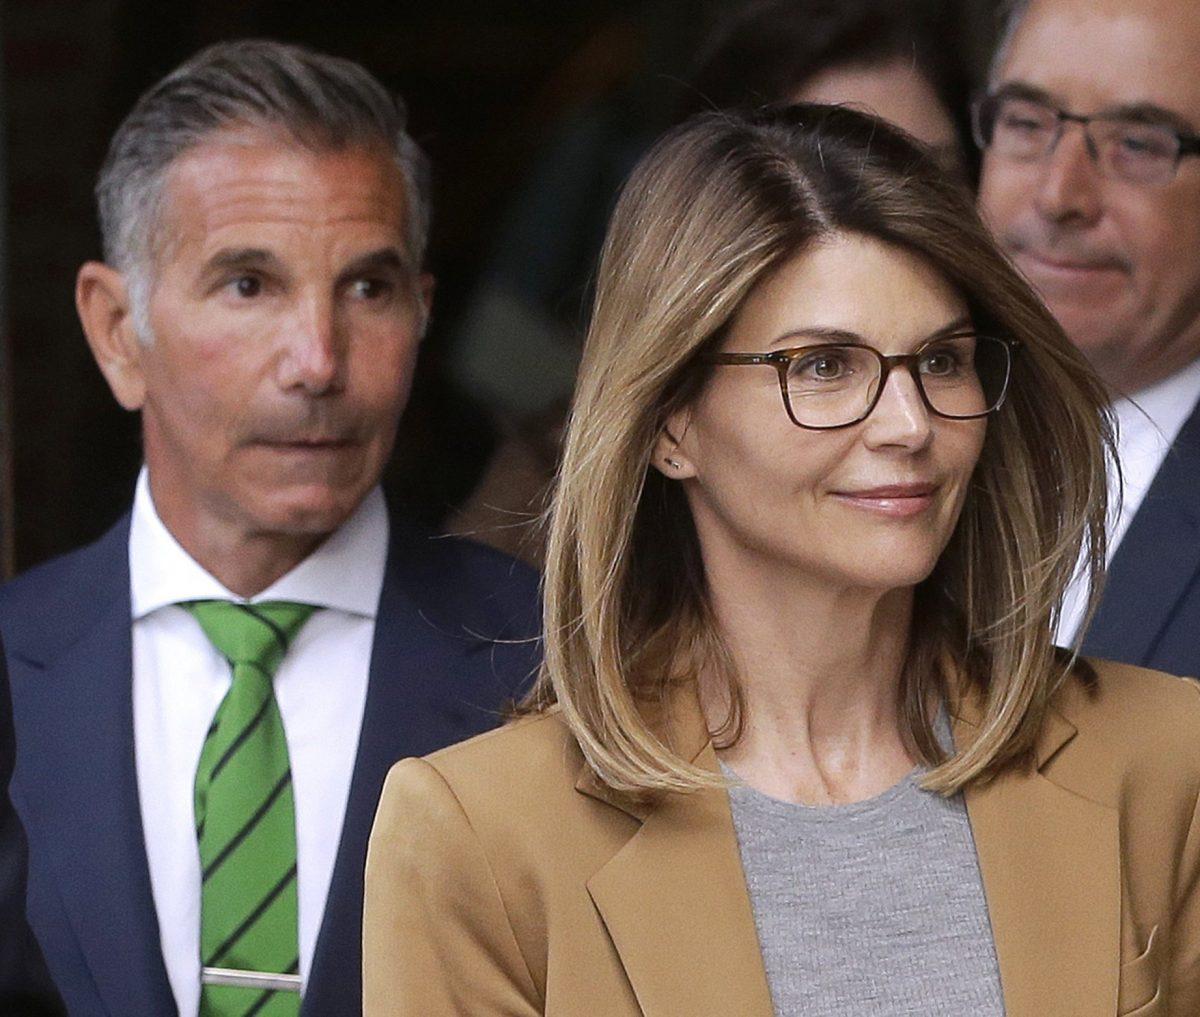 Actress Lori Loughlin, front, and husband, clothing designer Mossimo Giannulli, left, depart federal court in Boston on April 3, 2019. (Steven Senne/Photo via AP)